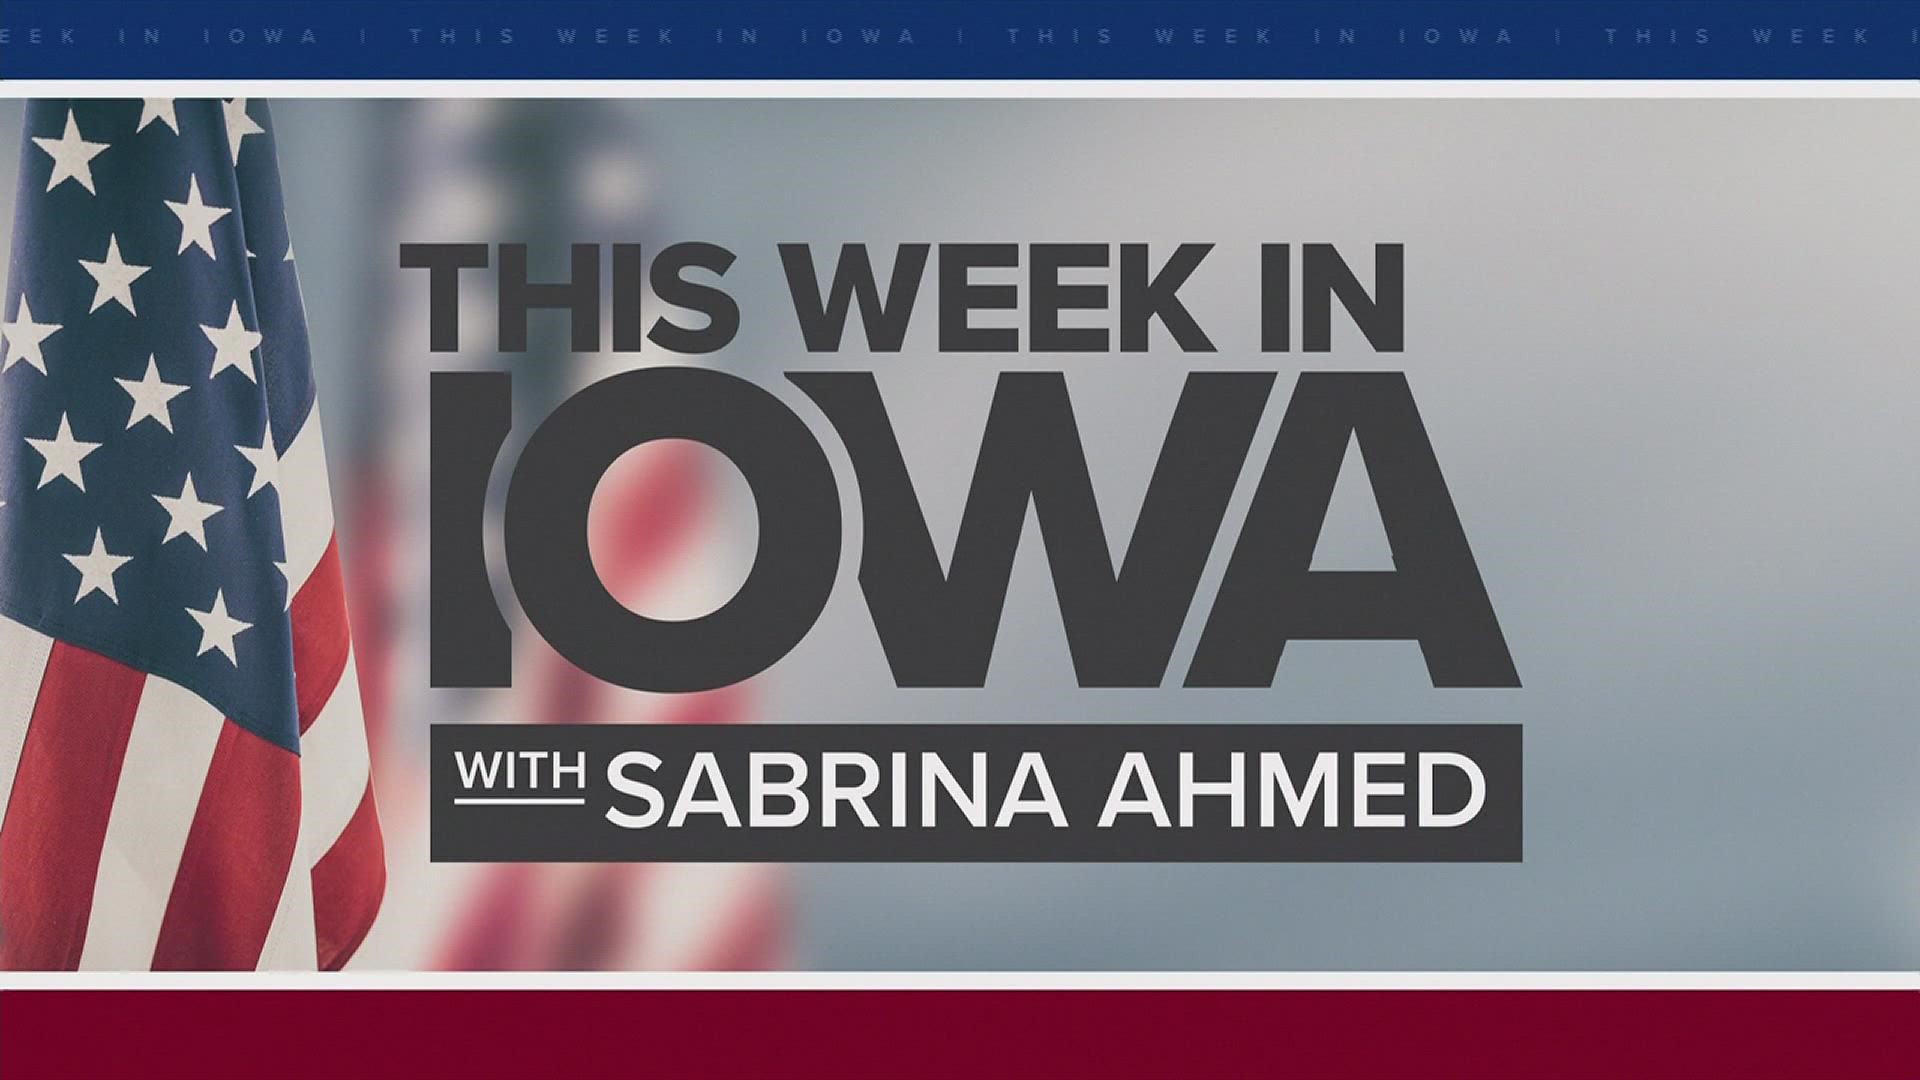 Sabrina Ahmed and analysts from both sides of the aisle break down the outcomes of central Iowa city council and school board races.